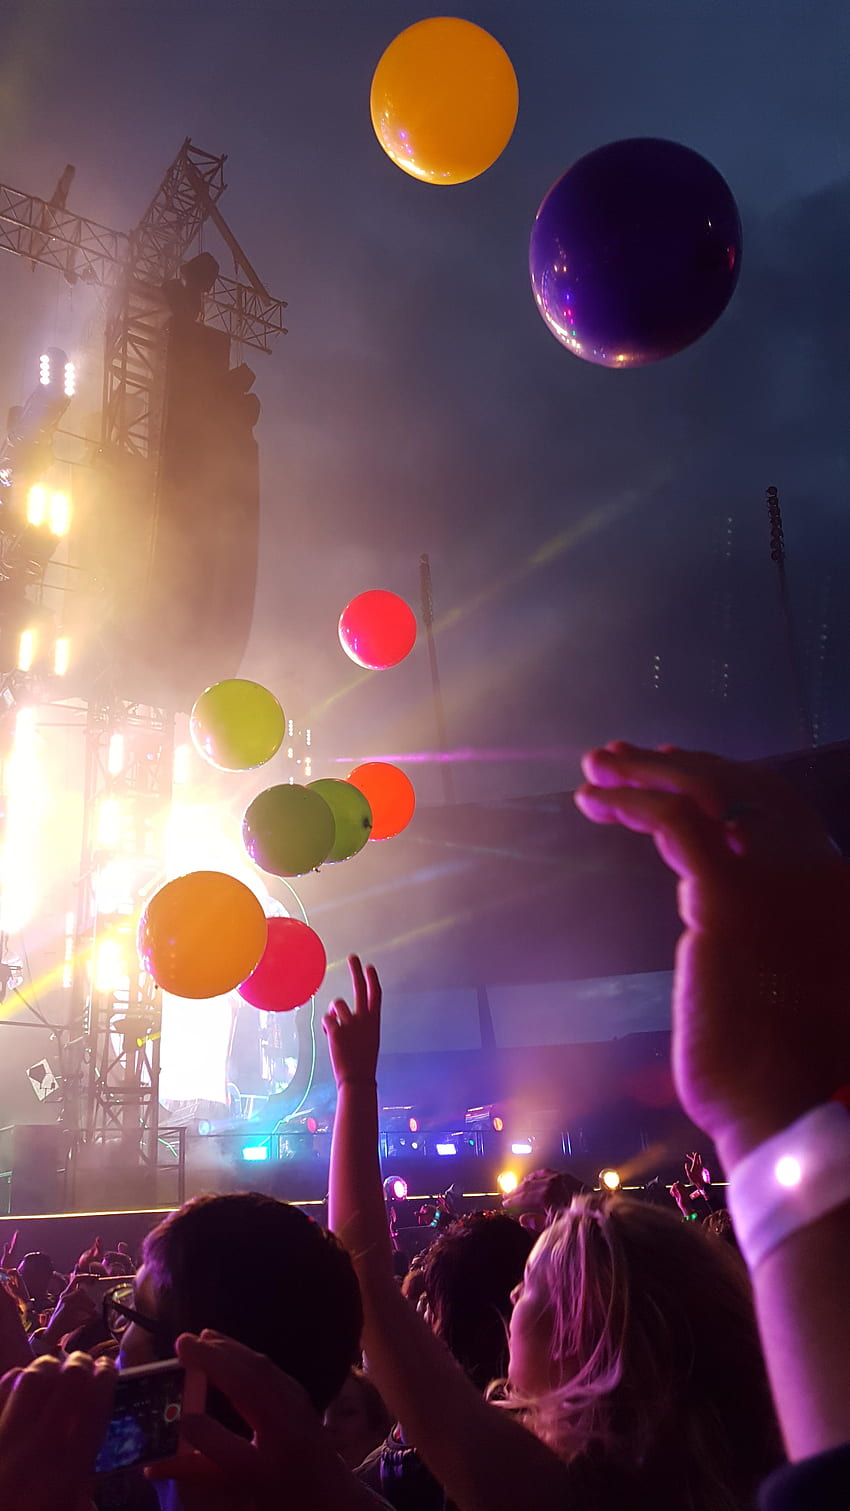 So I was at the Coldplay concert in Zurich yesterday. Thought I'd share my new phone with you guys! HD phone wallpaper